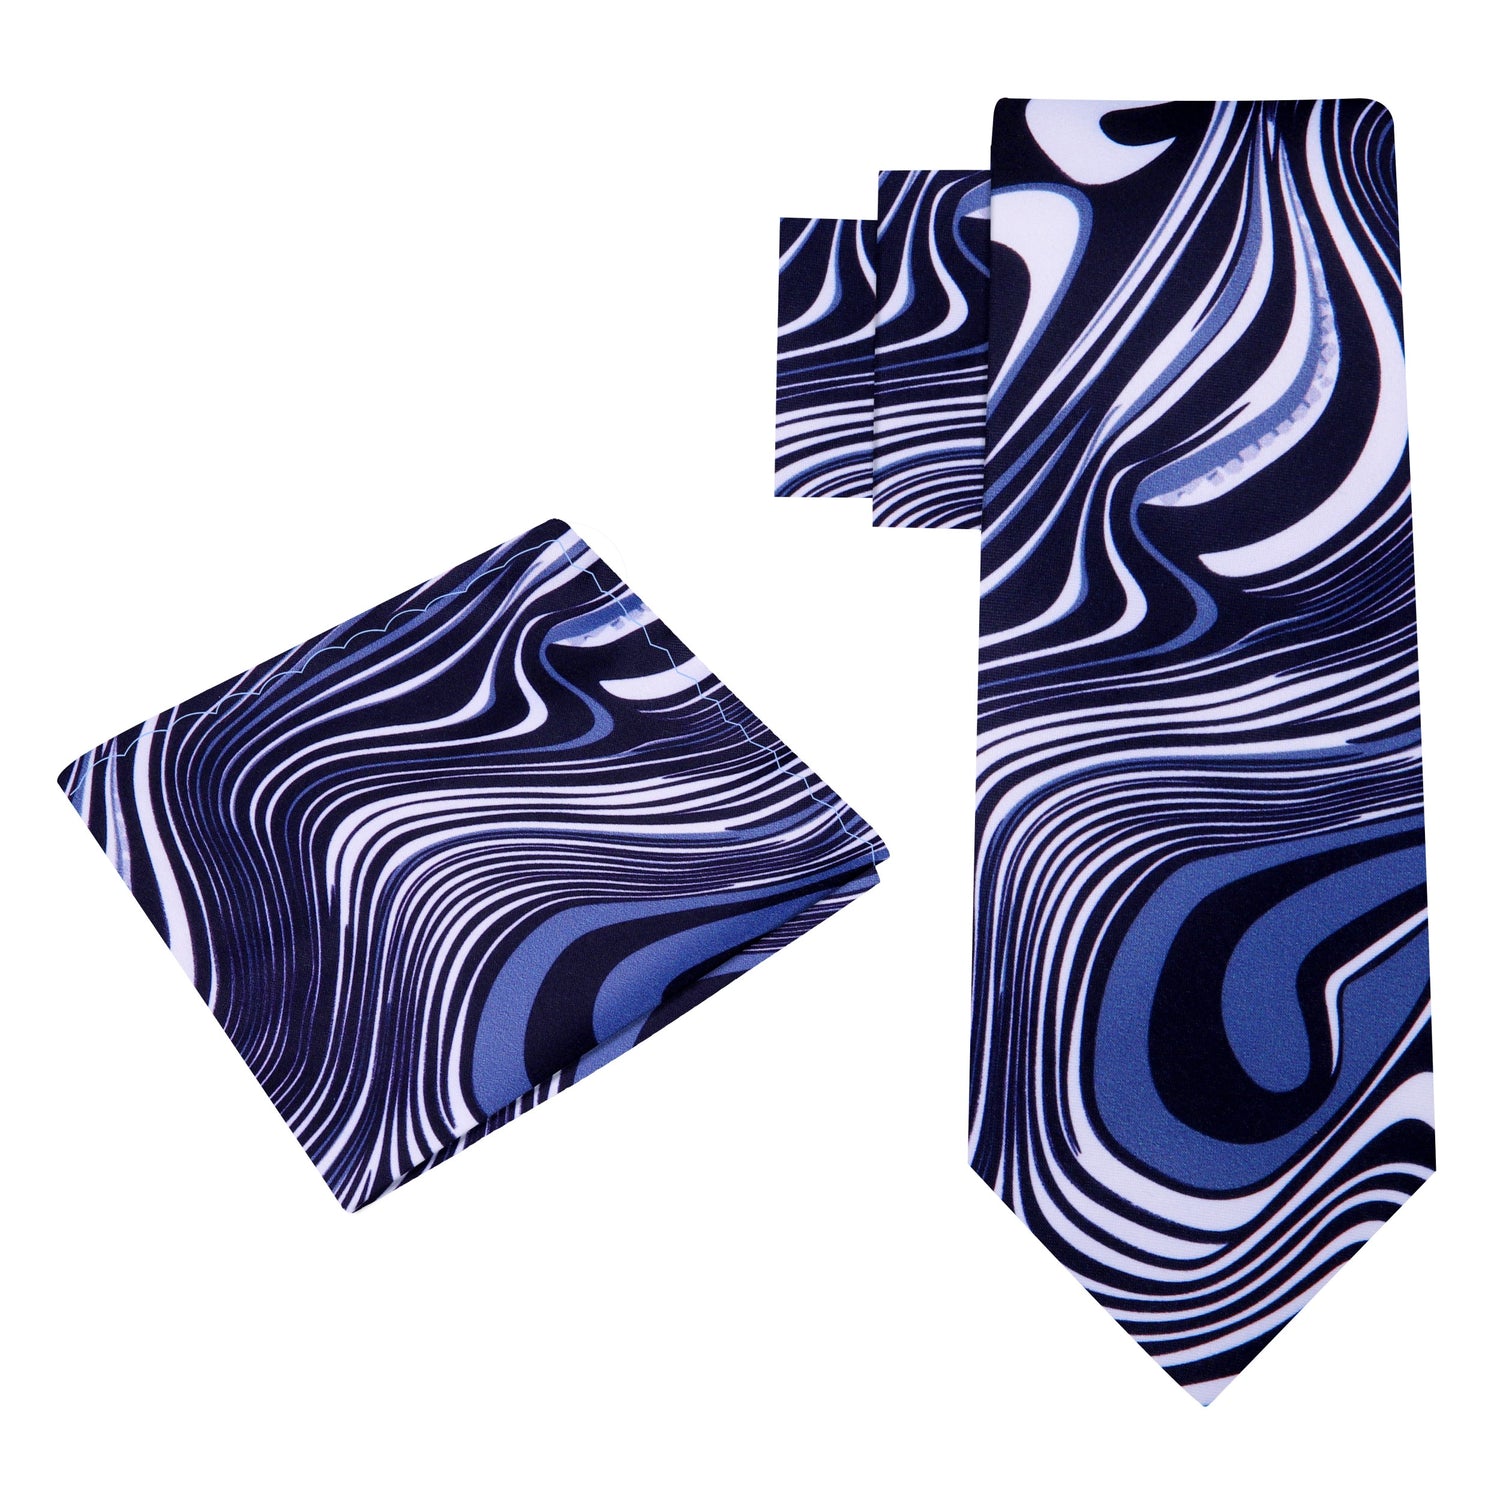 Alt View A Black, Grey, White Color Abstract Swirl Pattern Silk Necktie, Matching Pocket Square